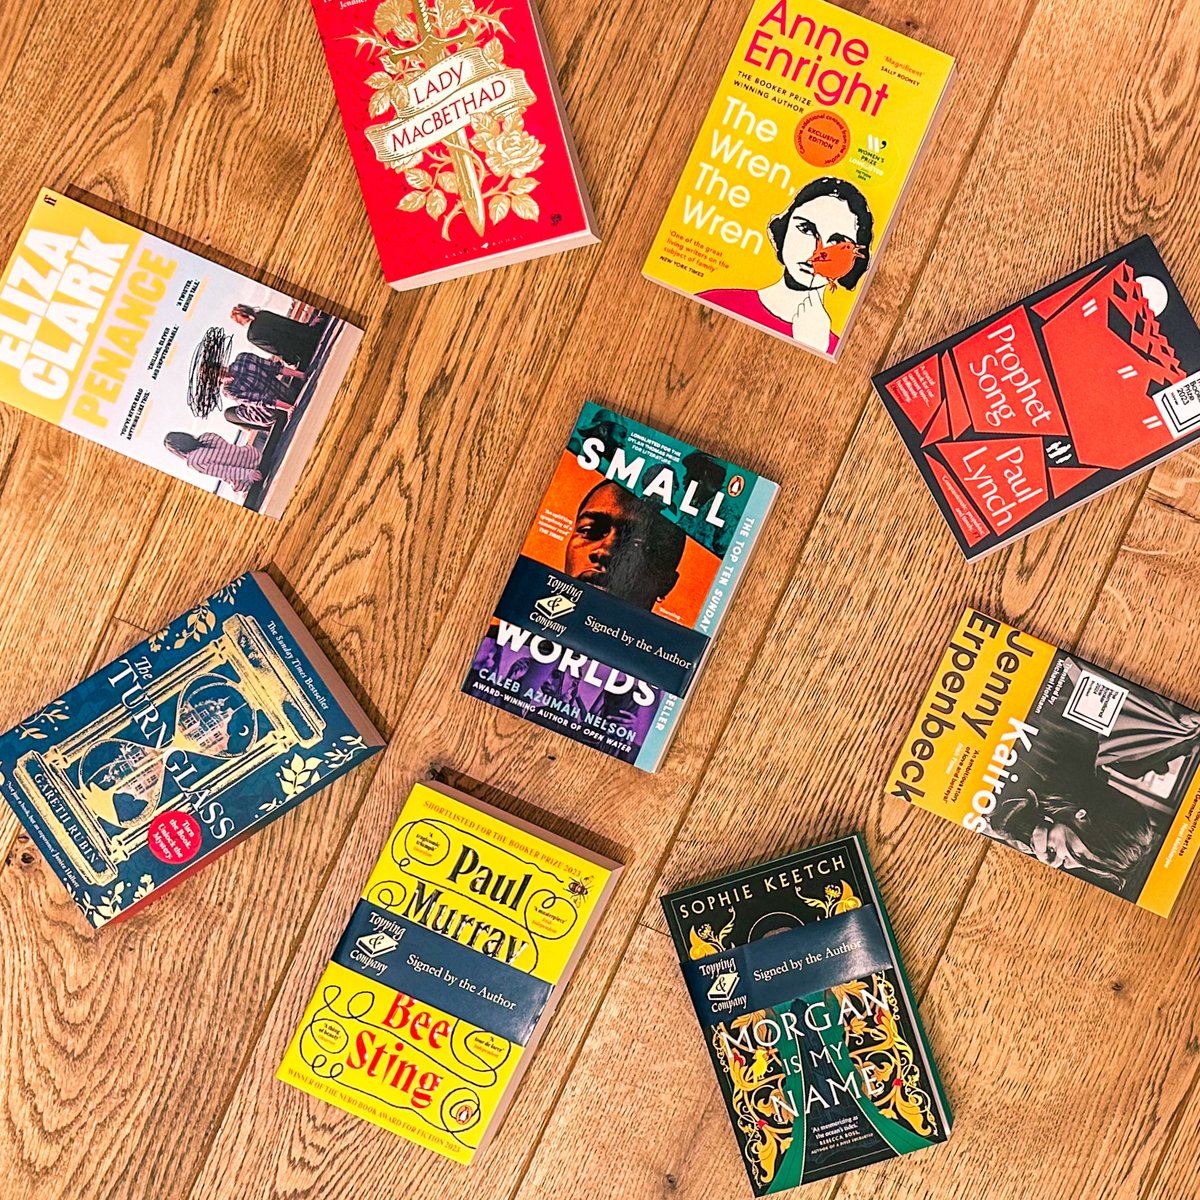 Celebrate the weekend with one of our new paperbacks! With so many fantastic releases it can be hard to pick, so we've narrowed it down for you with some of our favourites.